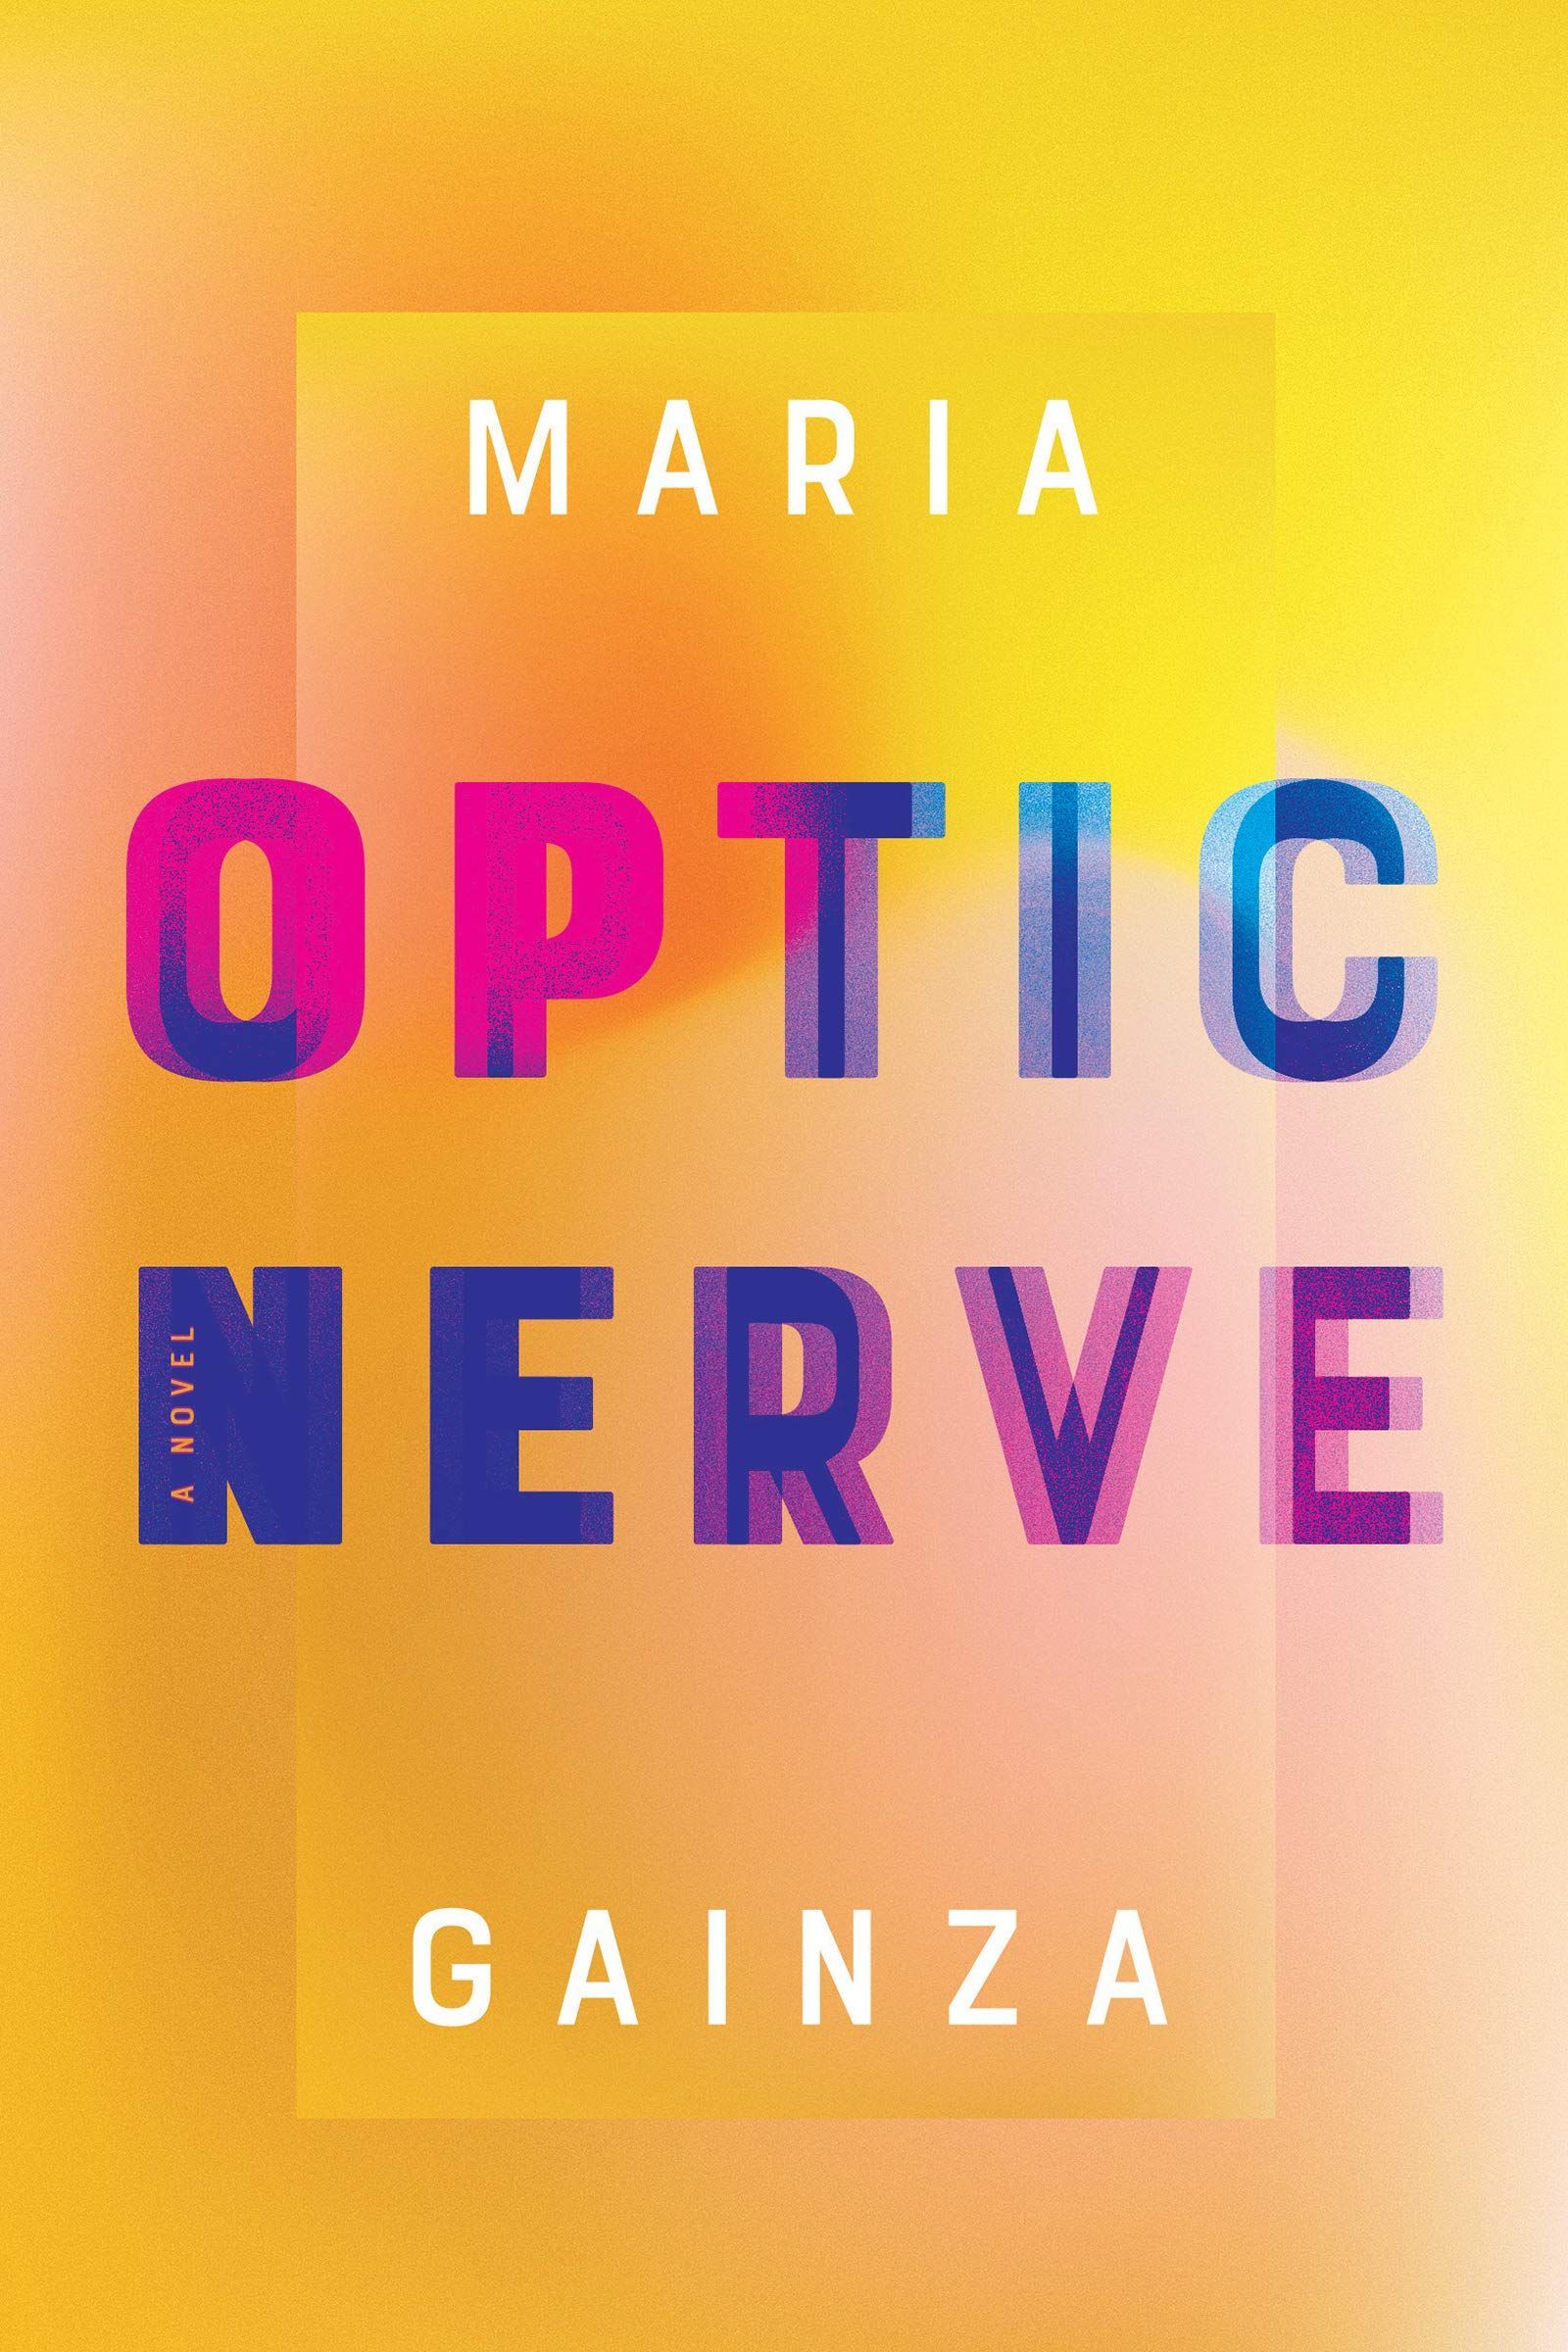 Learning to See: María Gainza’s “Optic Nerve”